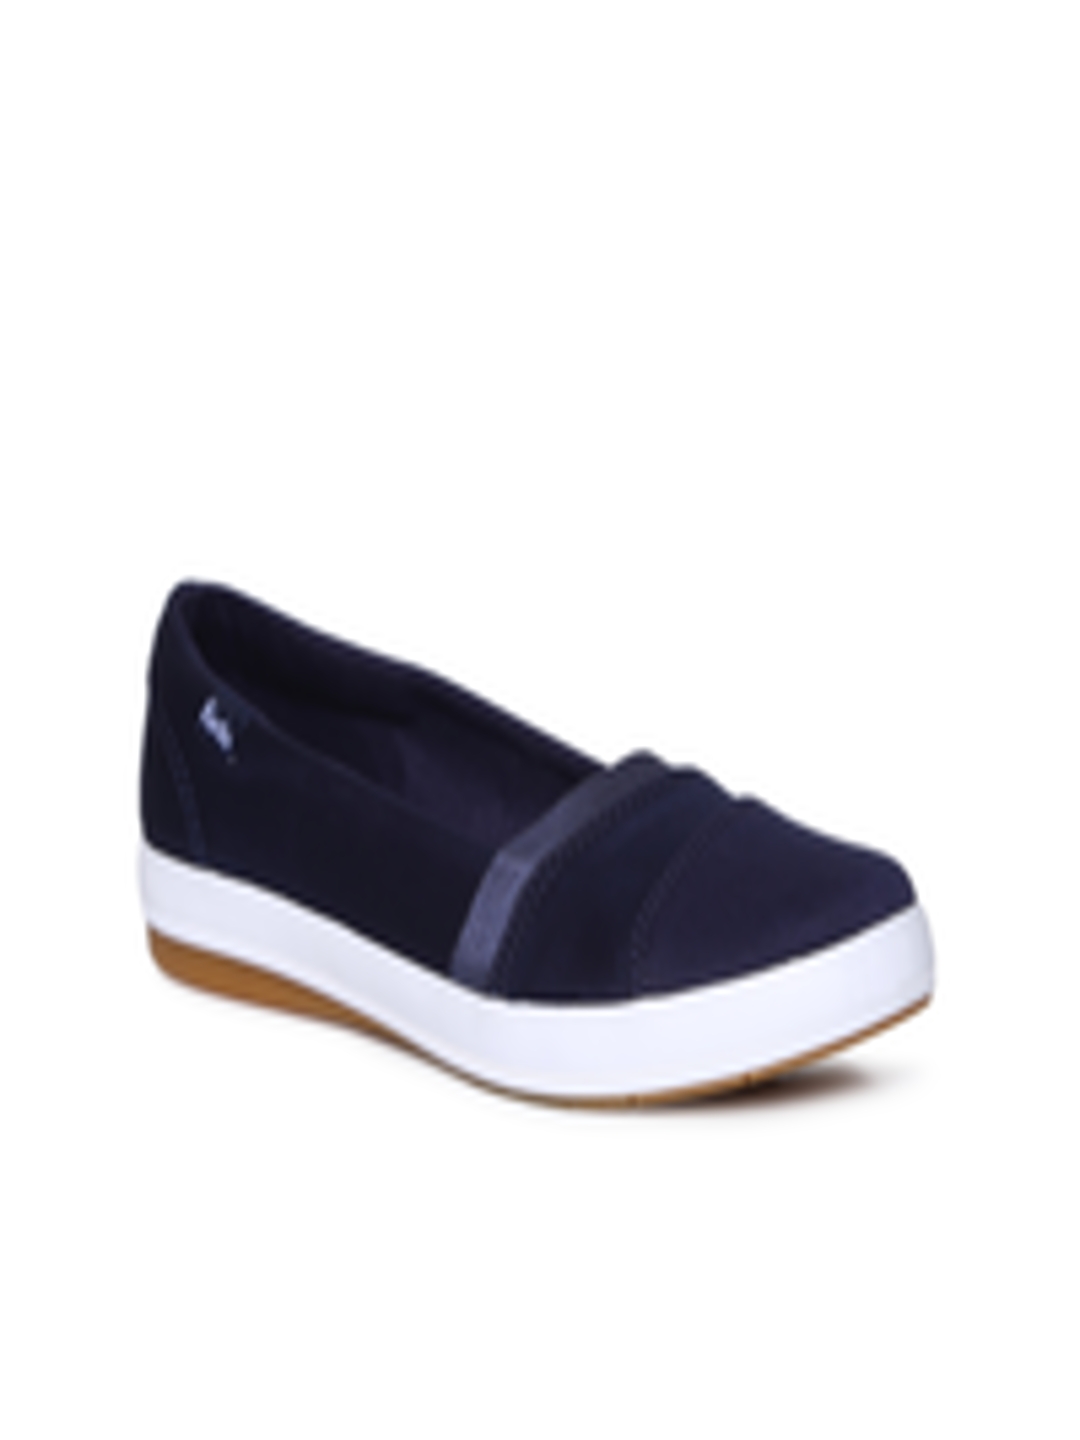 Buy Keds Women Navy Blue Slip On Sneakers - Casual Shoes for Women ...